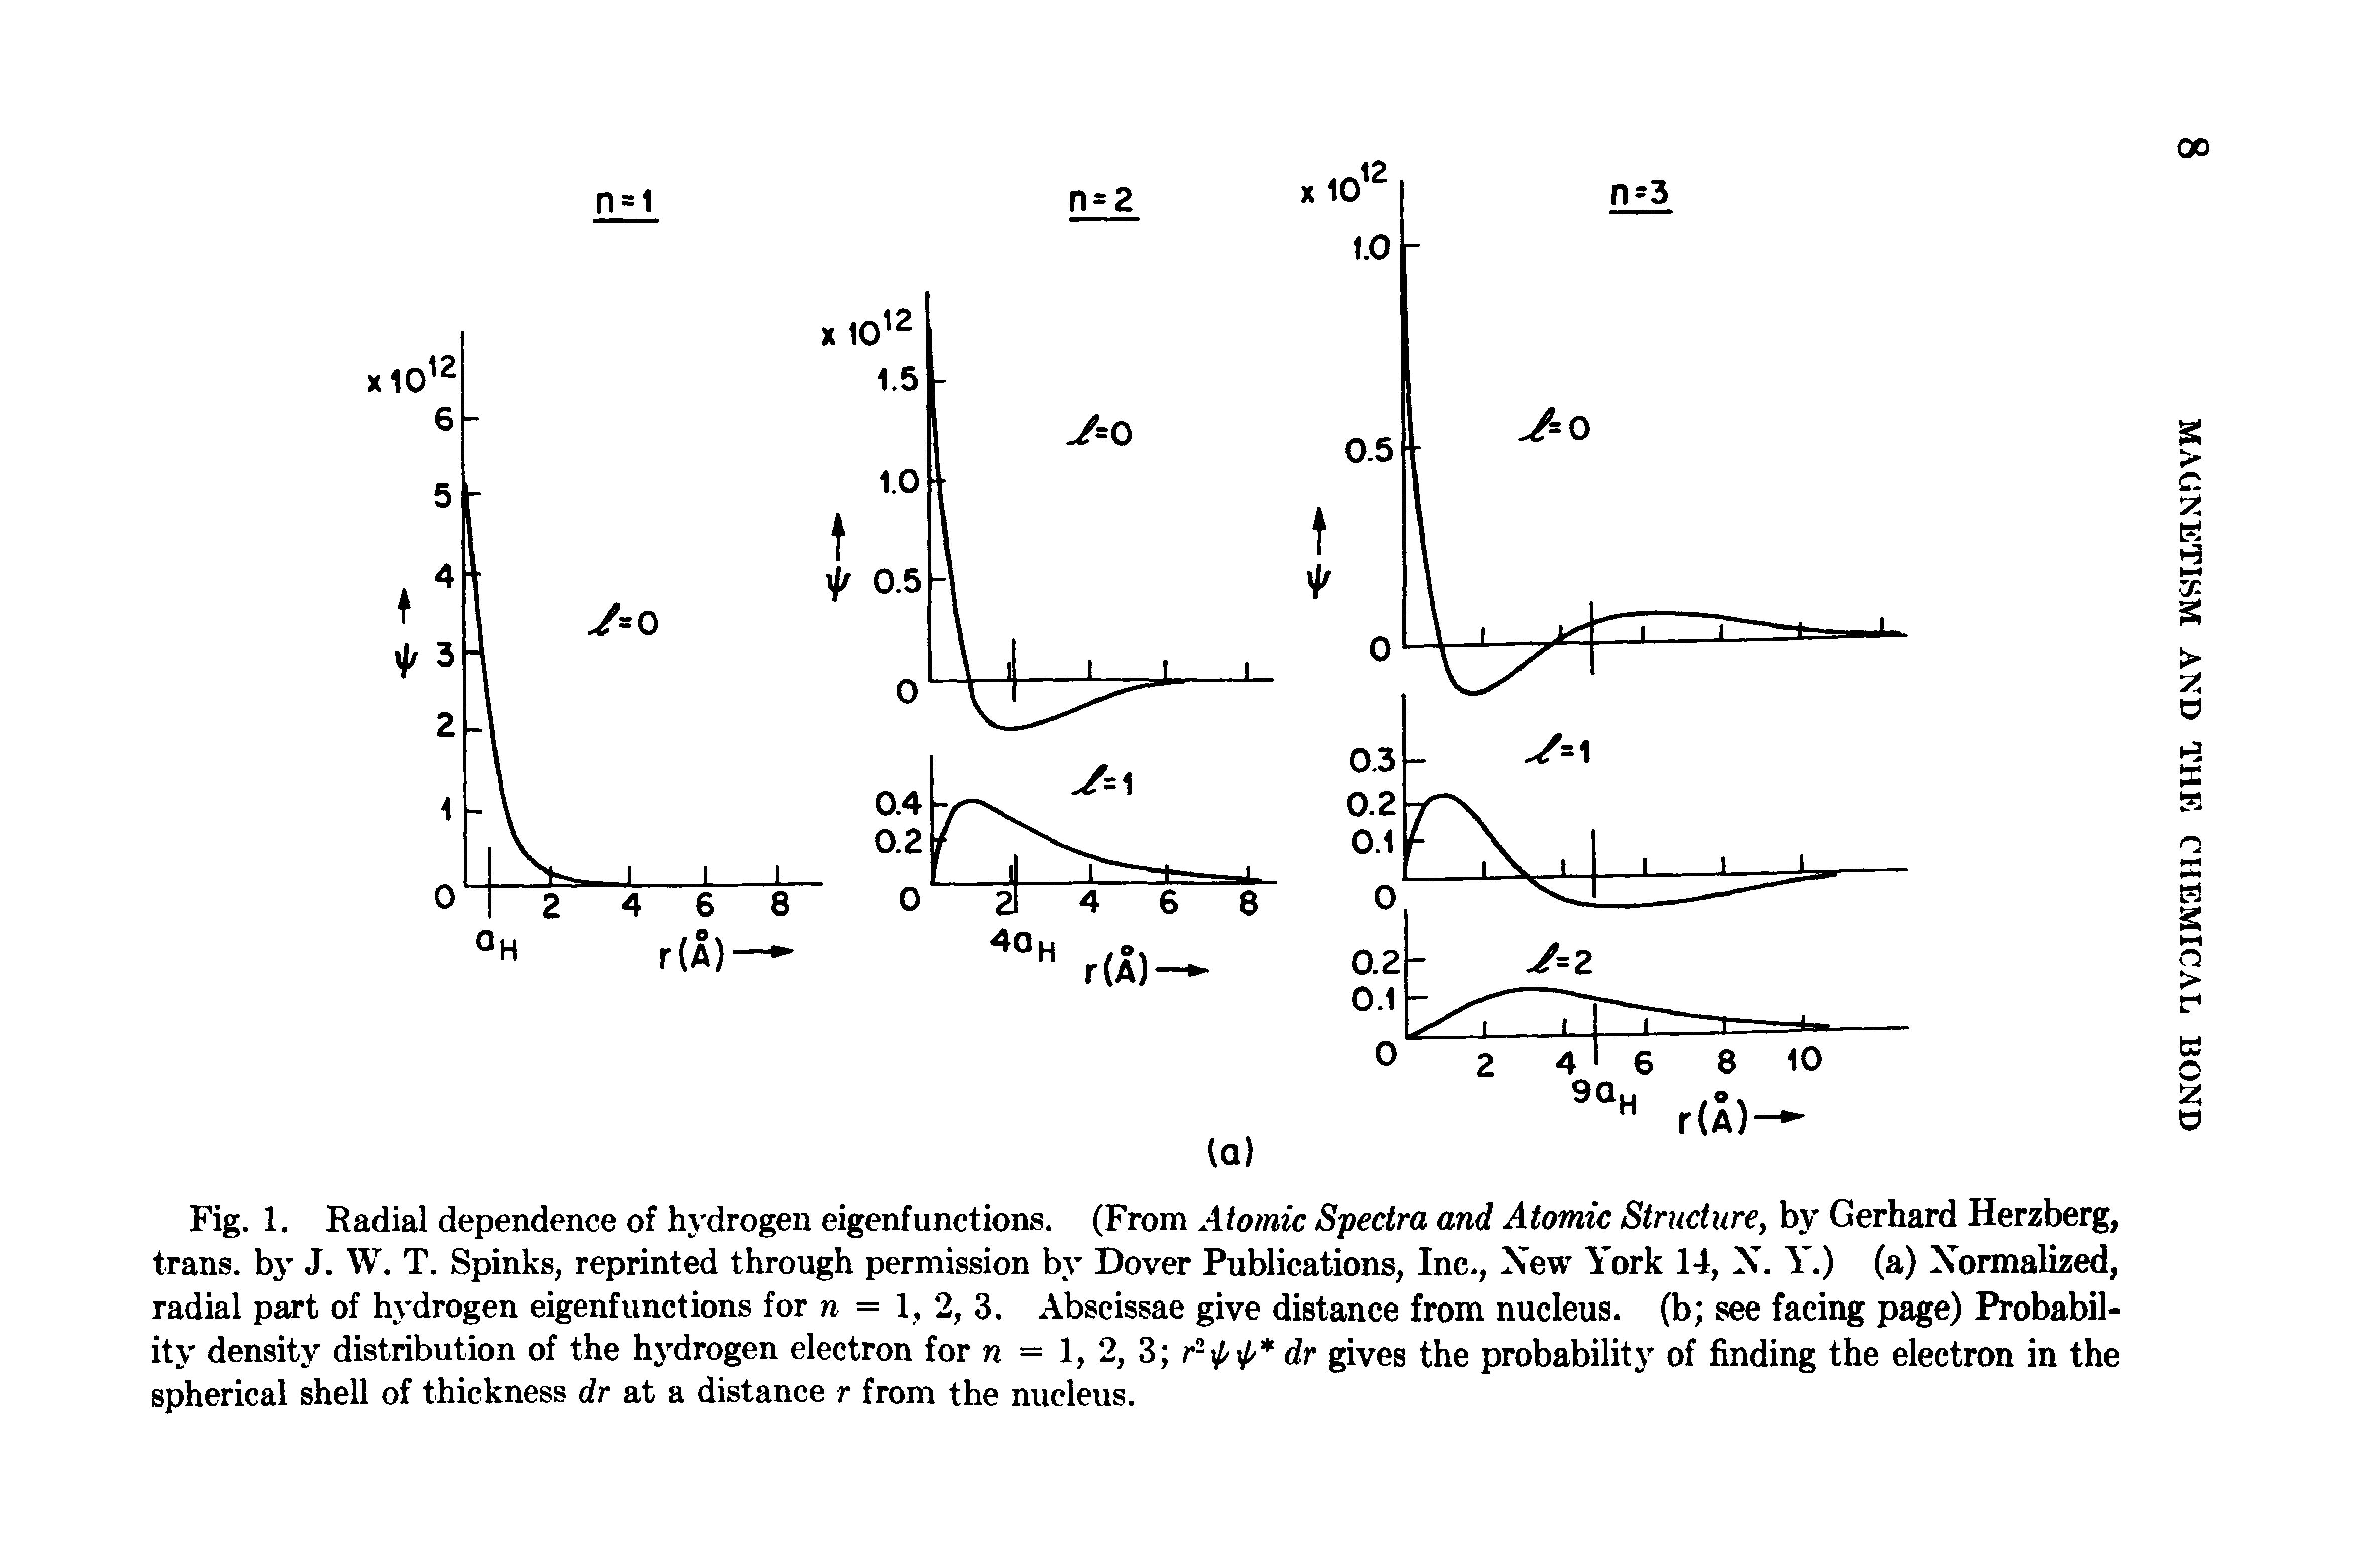 Fig. 1. Radial dependence of hydrogen eigenfunctions. (From Atomic Spectra and Atomic Structaret by Gerhard Herzberg, trans. by J. W. T. Spinks, reprinted through permission by Dover Publications, Inc., New York 14, X. Y.) (a) Normalized,...